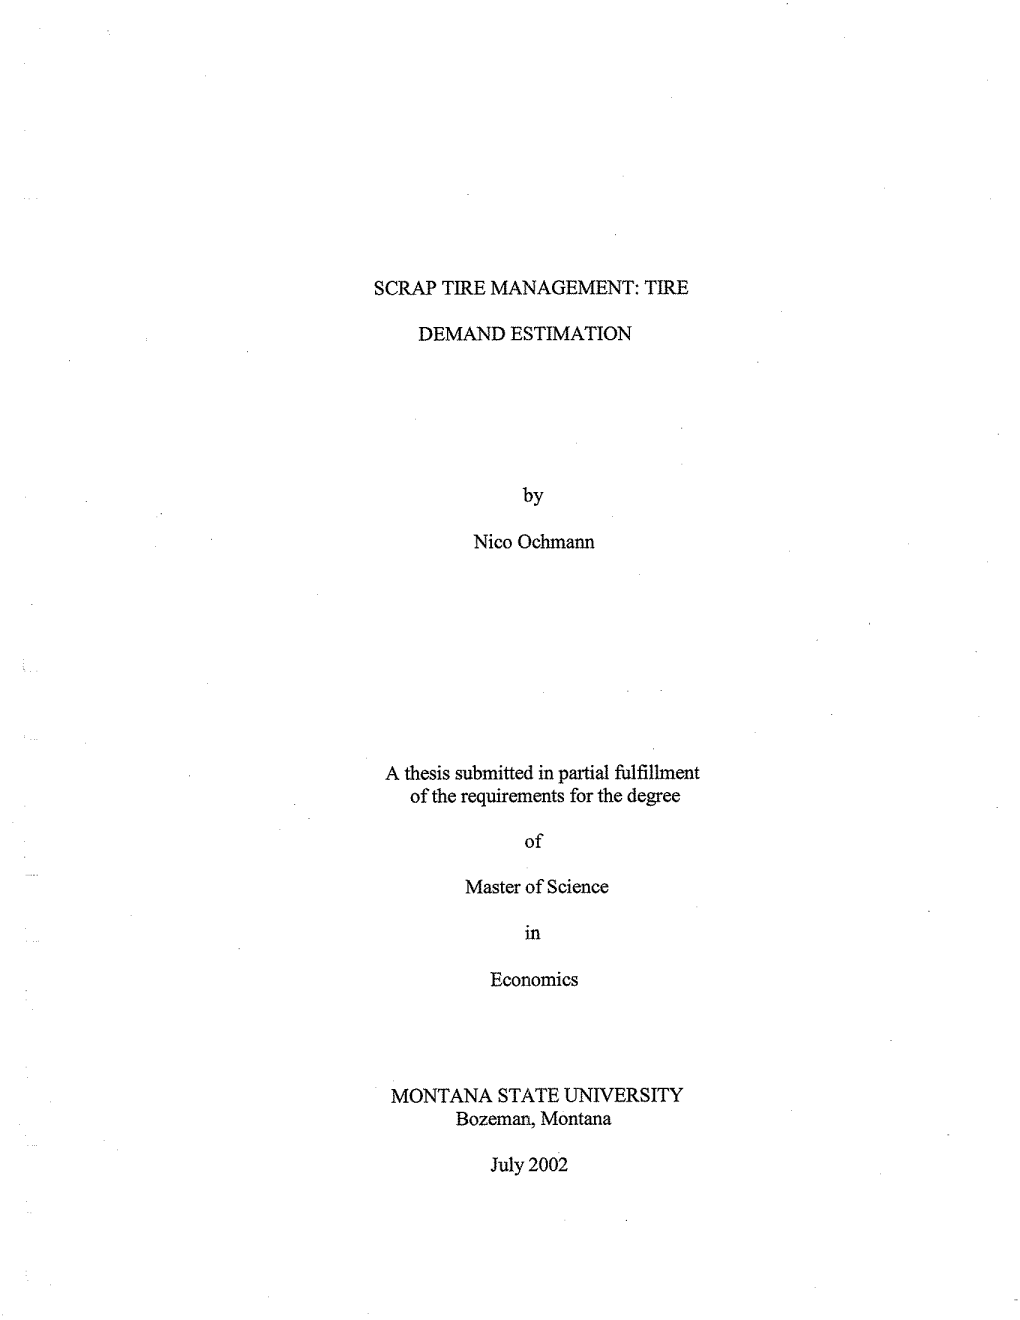 SCRAP TIRE MANAGEMENT: TIRE DEMAND ESTIMATION by Nico Ochmann a Thesis Submitted in Partial Fulfillment of the Requirements